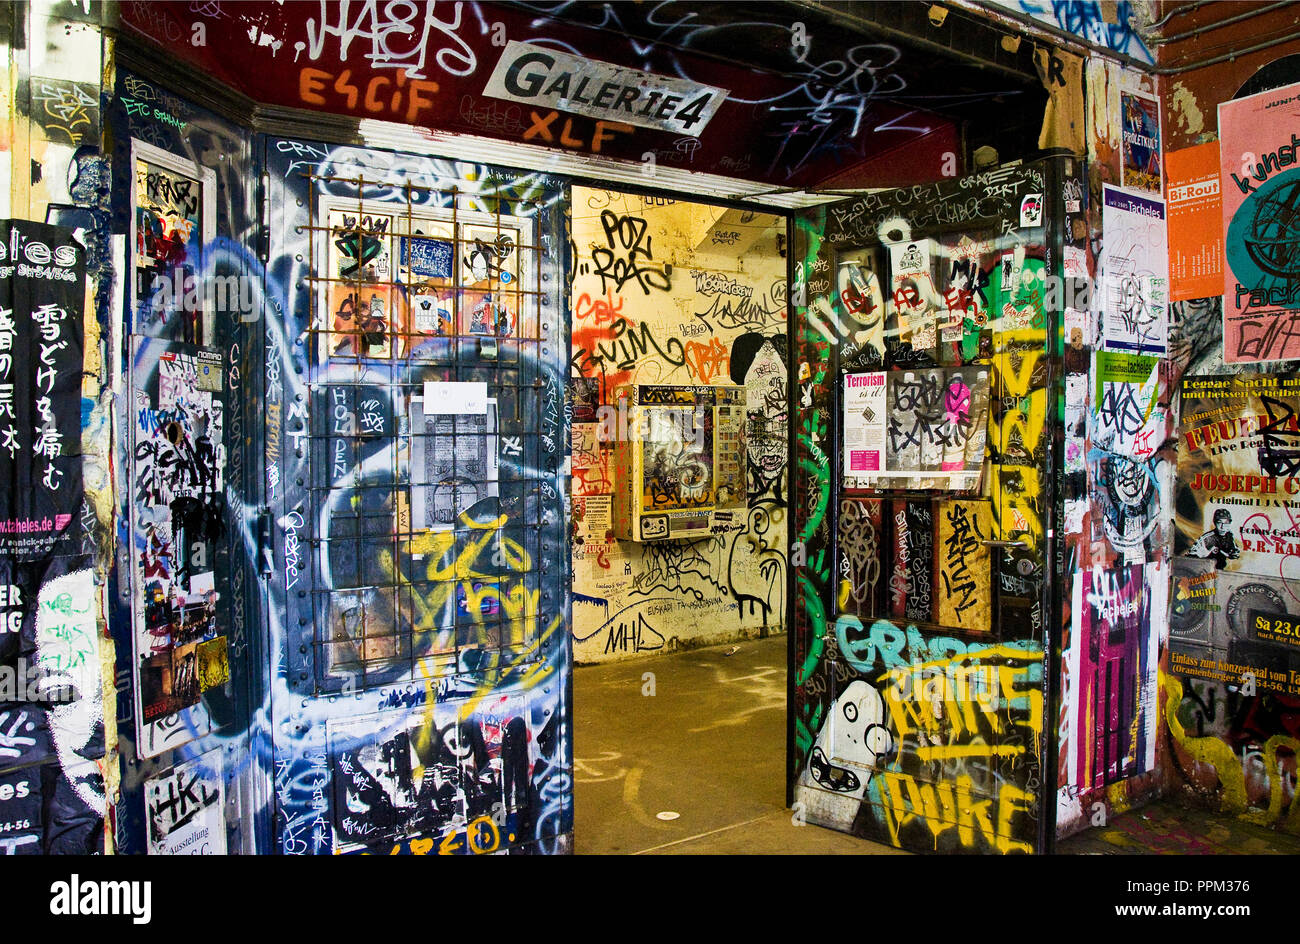 The Kunsthaus Tacheles (Art House Tacheles) was an art center in Berlin, in the district known as Mitte. Colourful graffiti-style murals are painted o Stock Photo